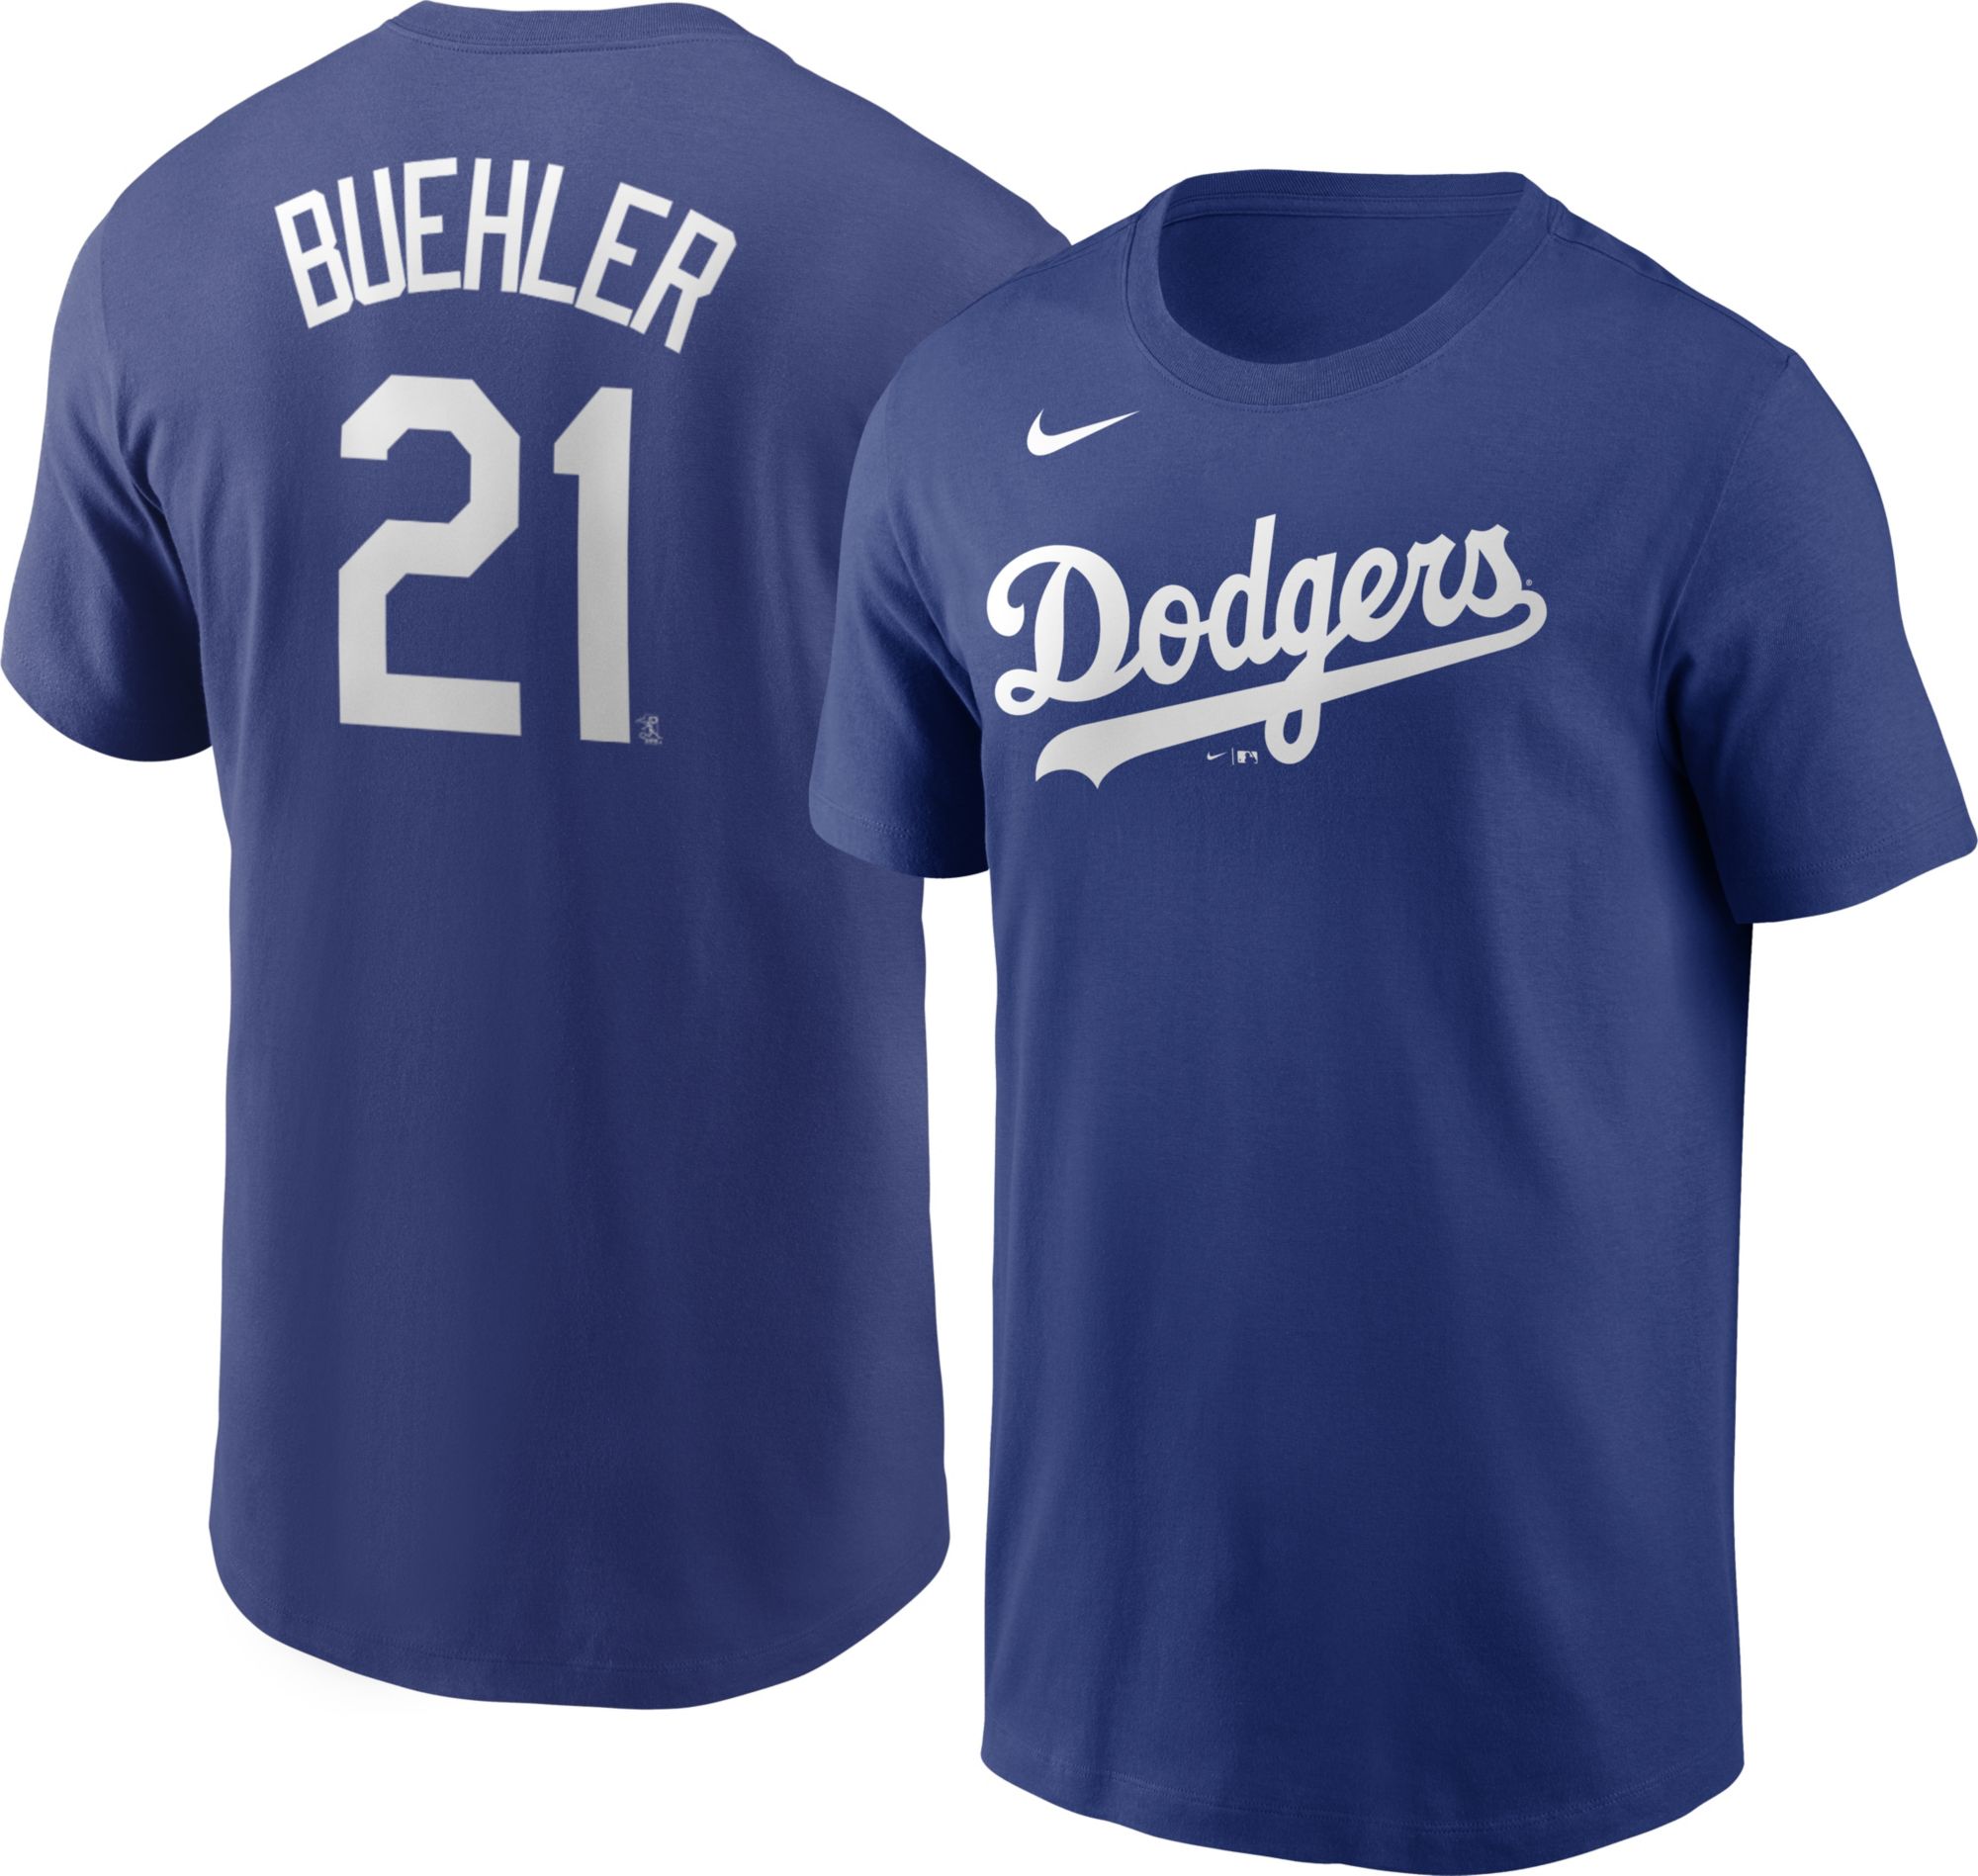 Los Angeles Dodgers Nike Official Replica Road Jersey - Mens with Buehler  21 printing